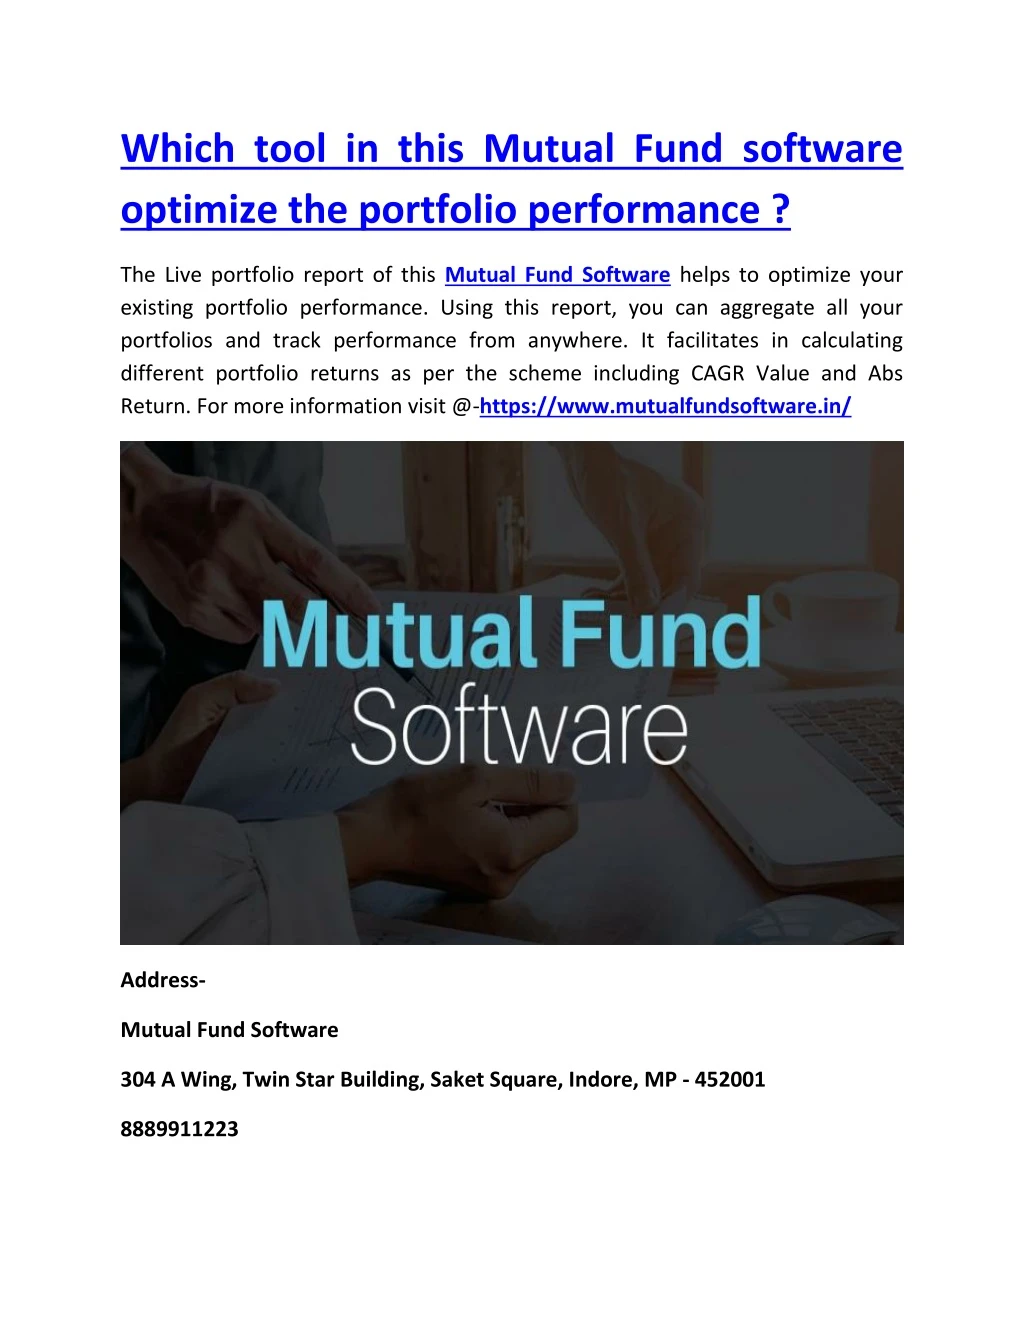 which tool in this mutual fund software optimize